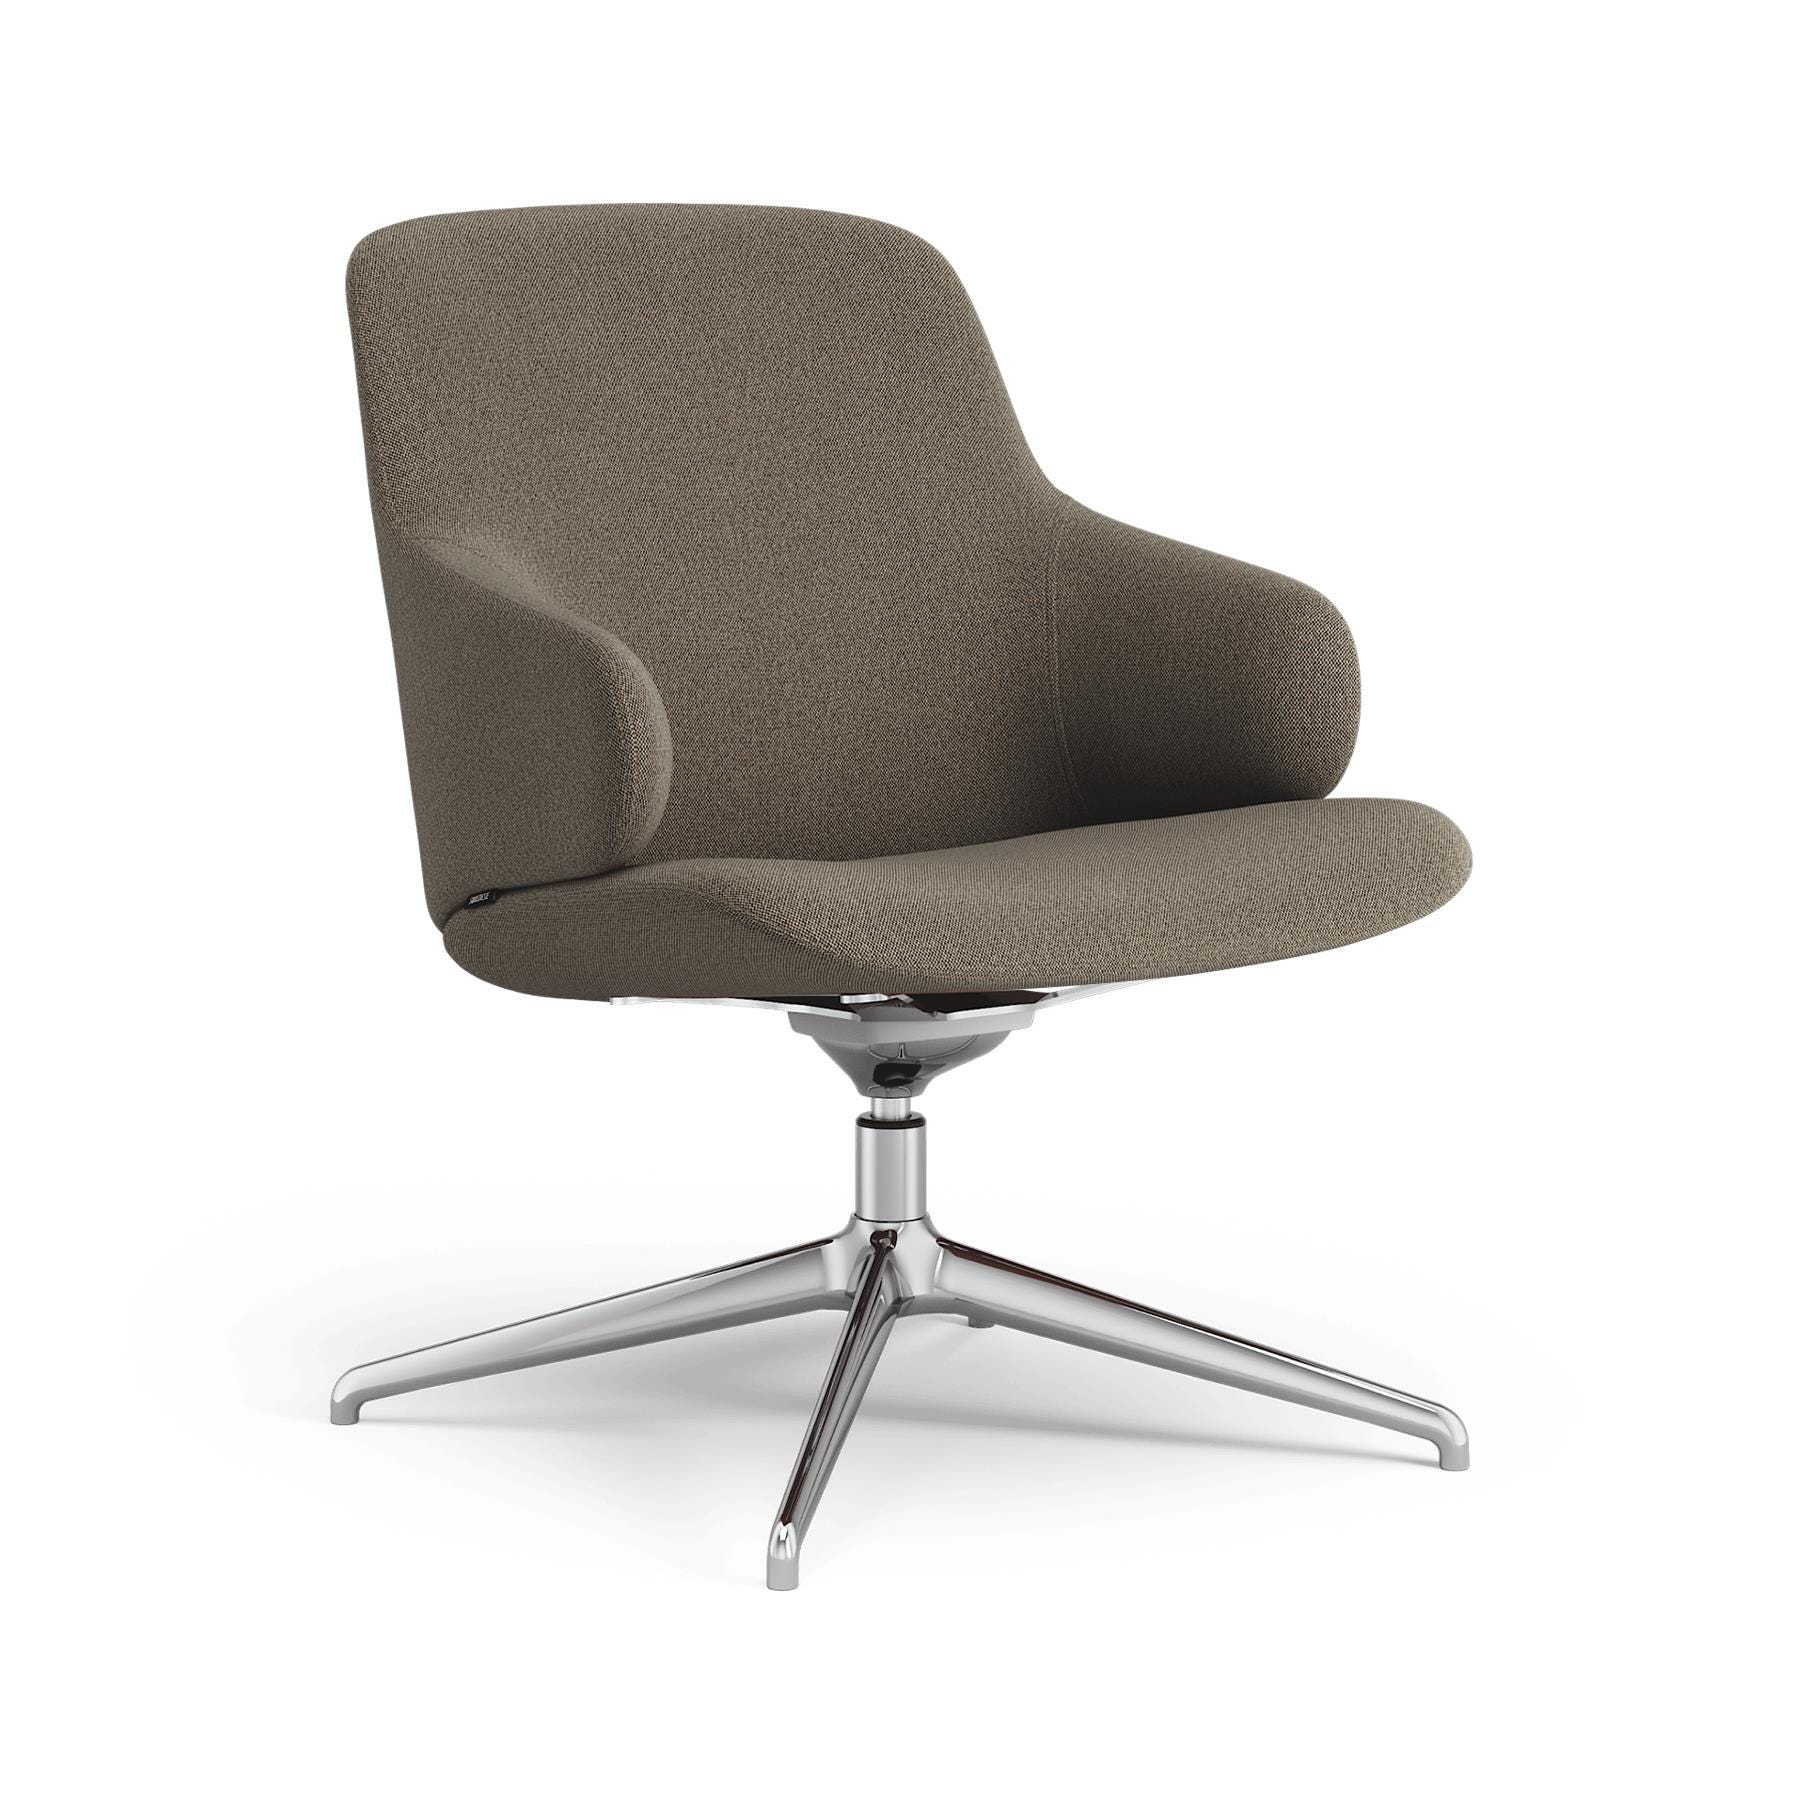 Swedese Amstelle Easy Chair Swivel Polished Aluminium Main Line Flax 23 Brown Designer Furniture From Holloways Of Ludlow